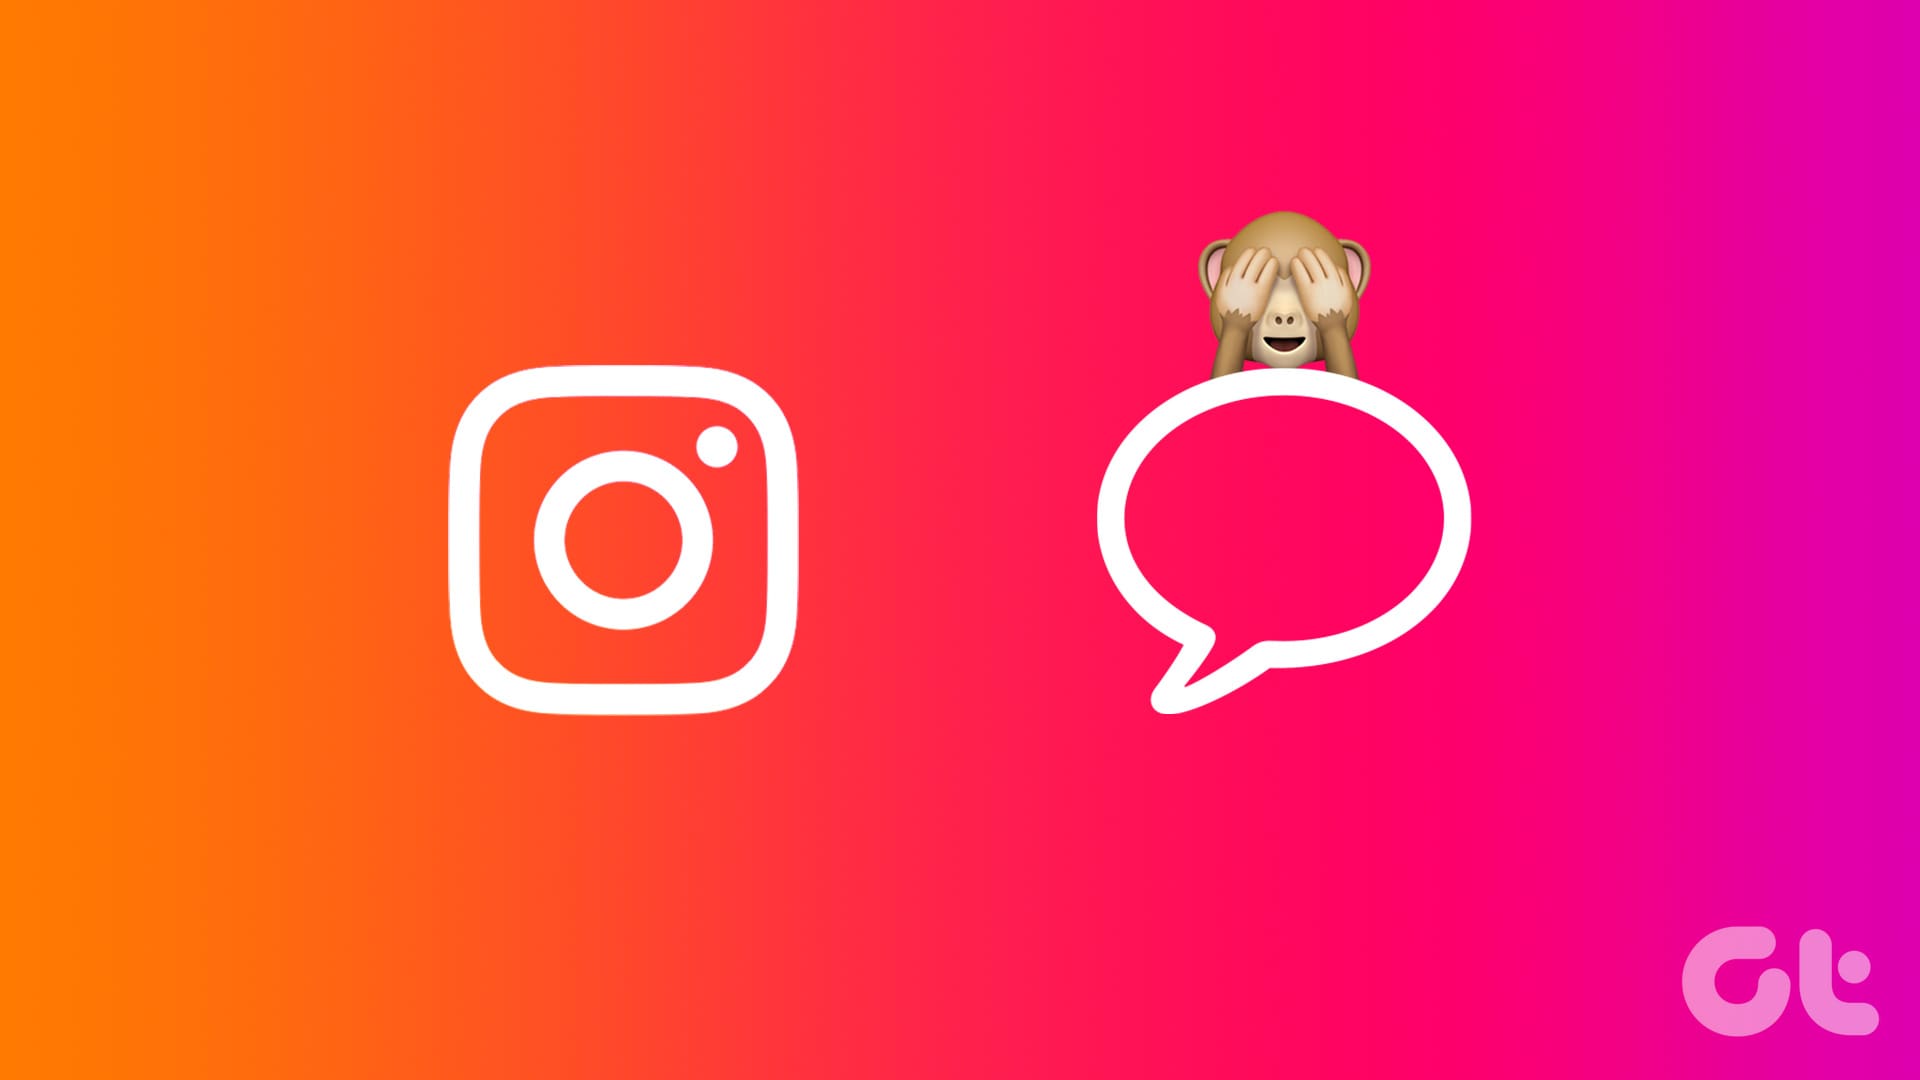 How to Unsee or Unread Messages on Instagram